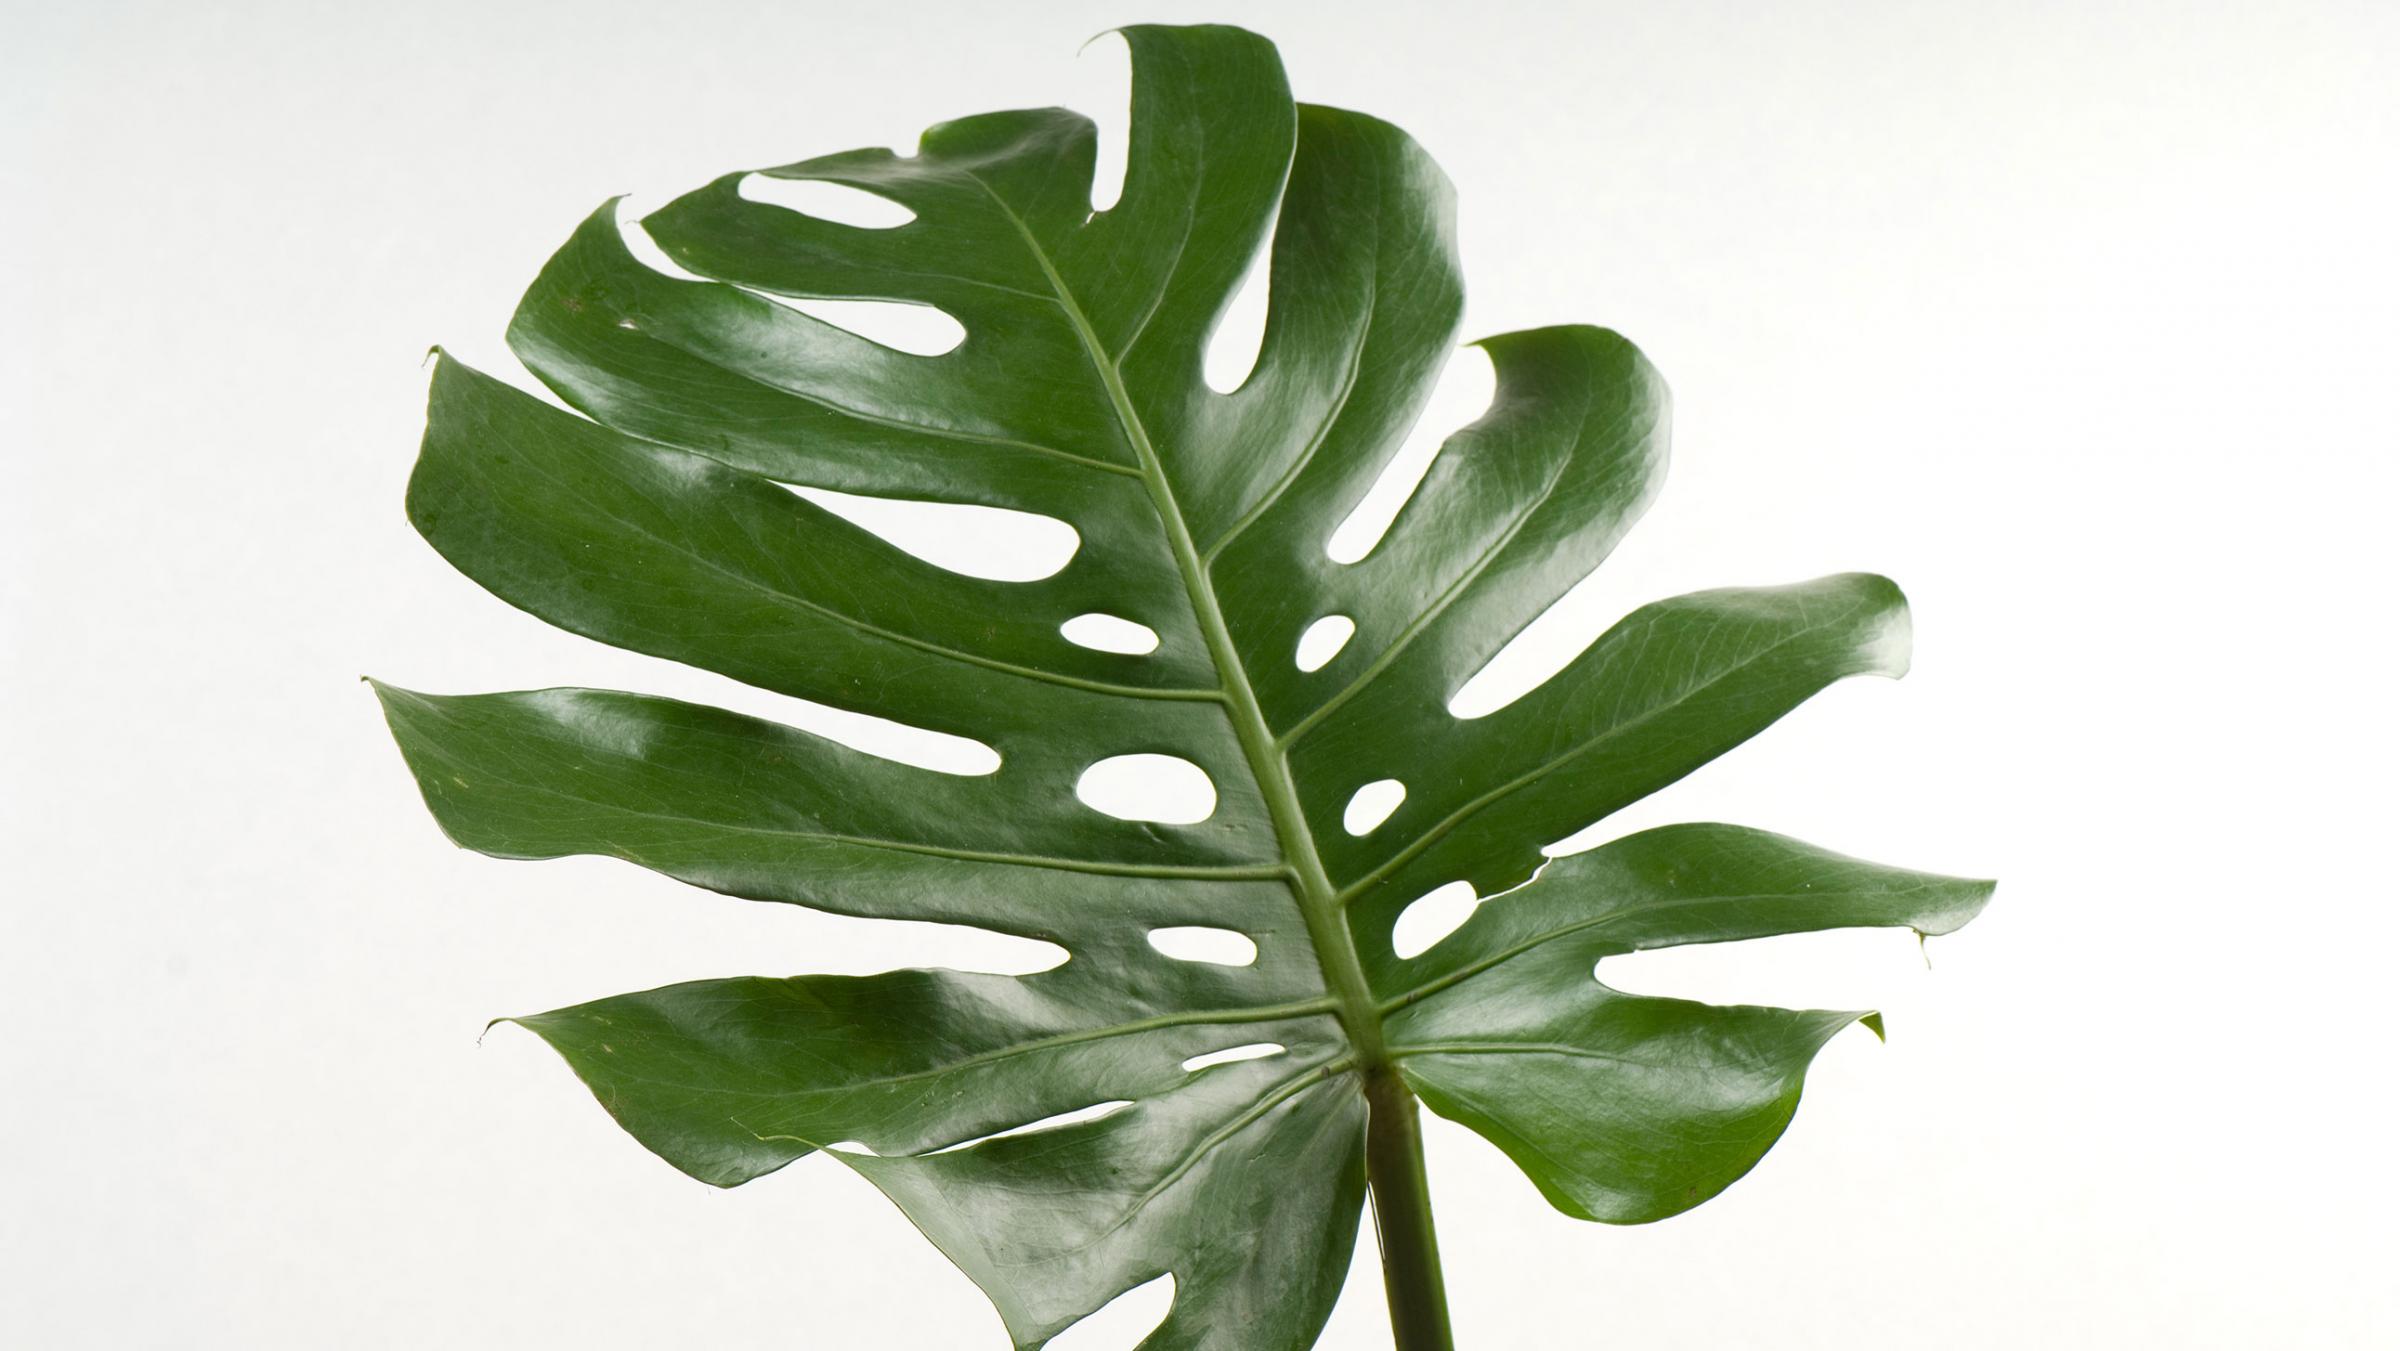 Direct Large Leaf House Plants Homelife Top 15 Indoor | Lakaysports ...